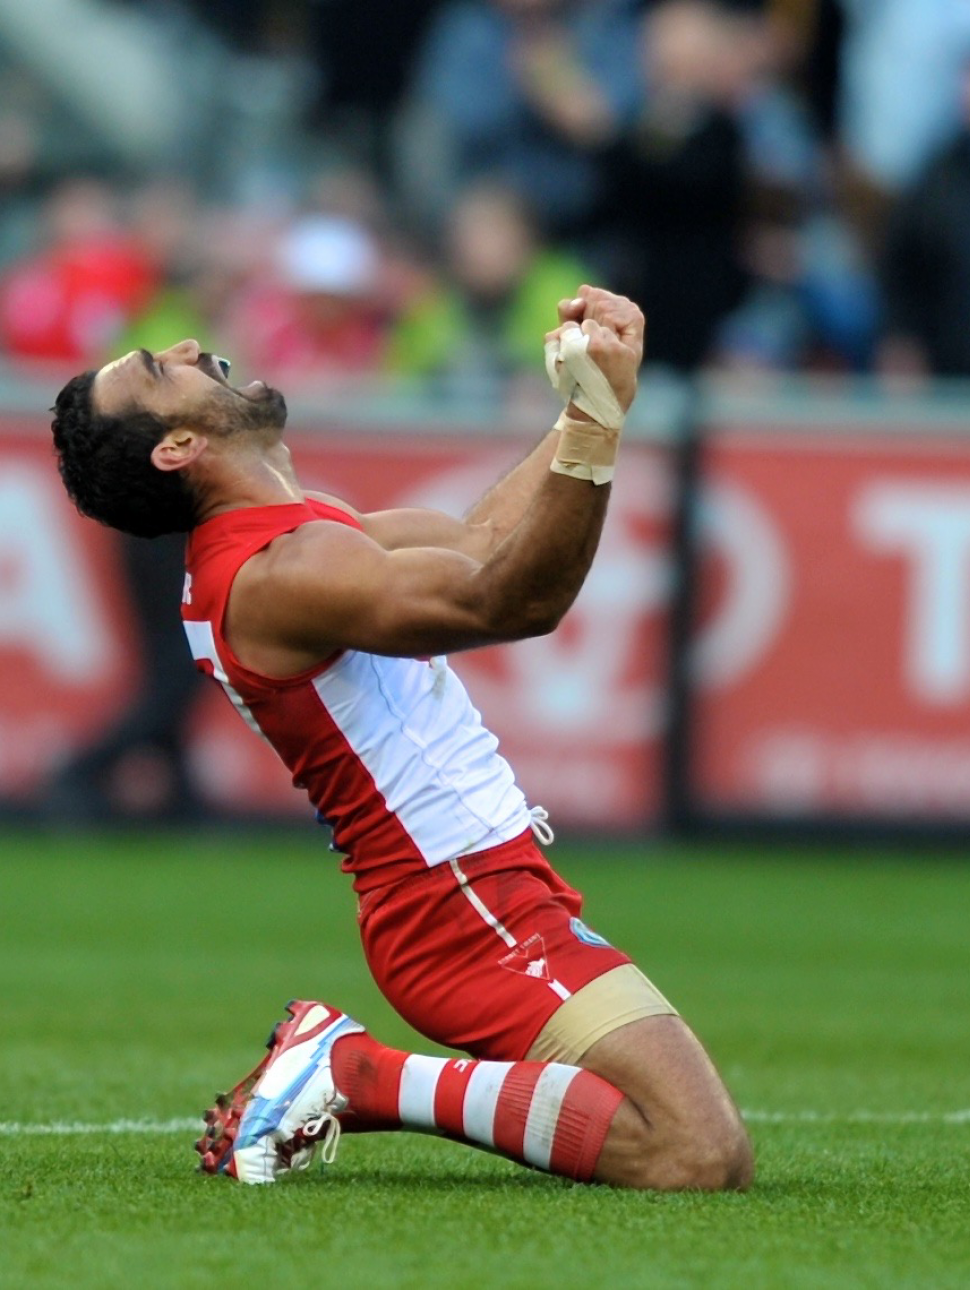 Adam Goodes is on AFL playing field, dressed in Sydney Swans uniform on his knees arms outstretched with emotion